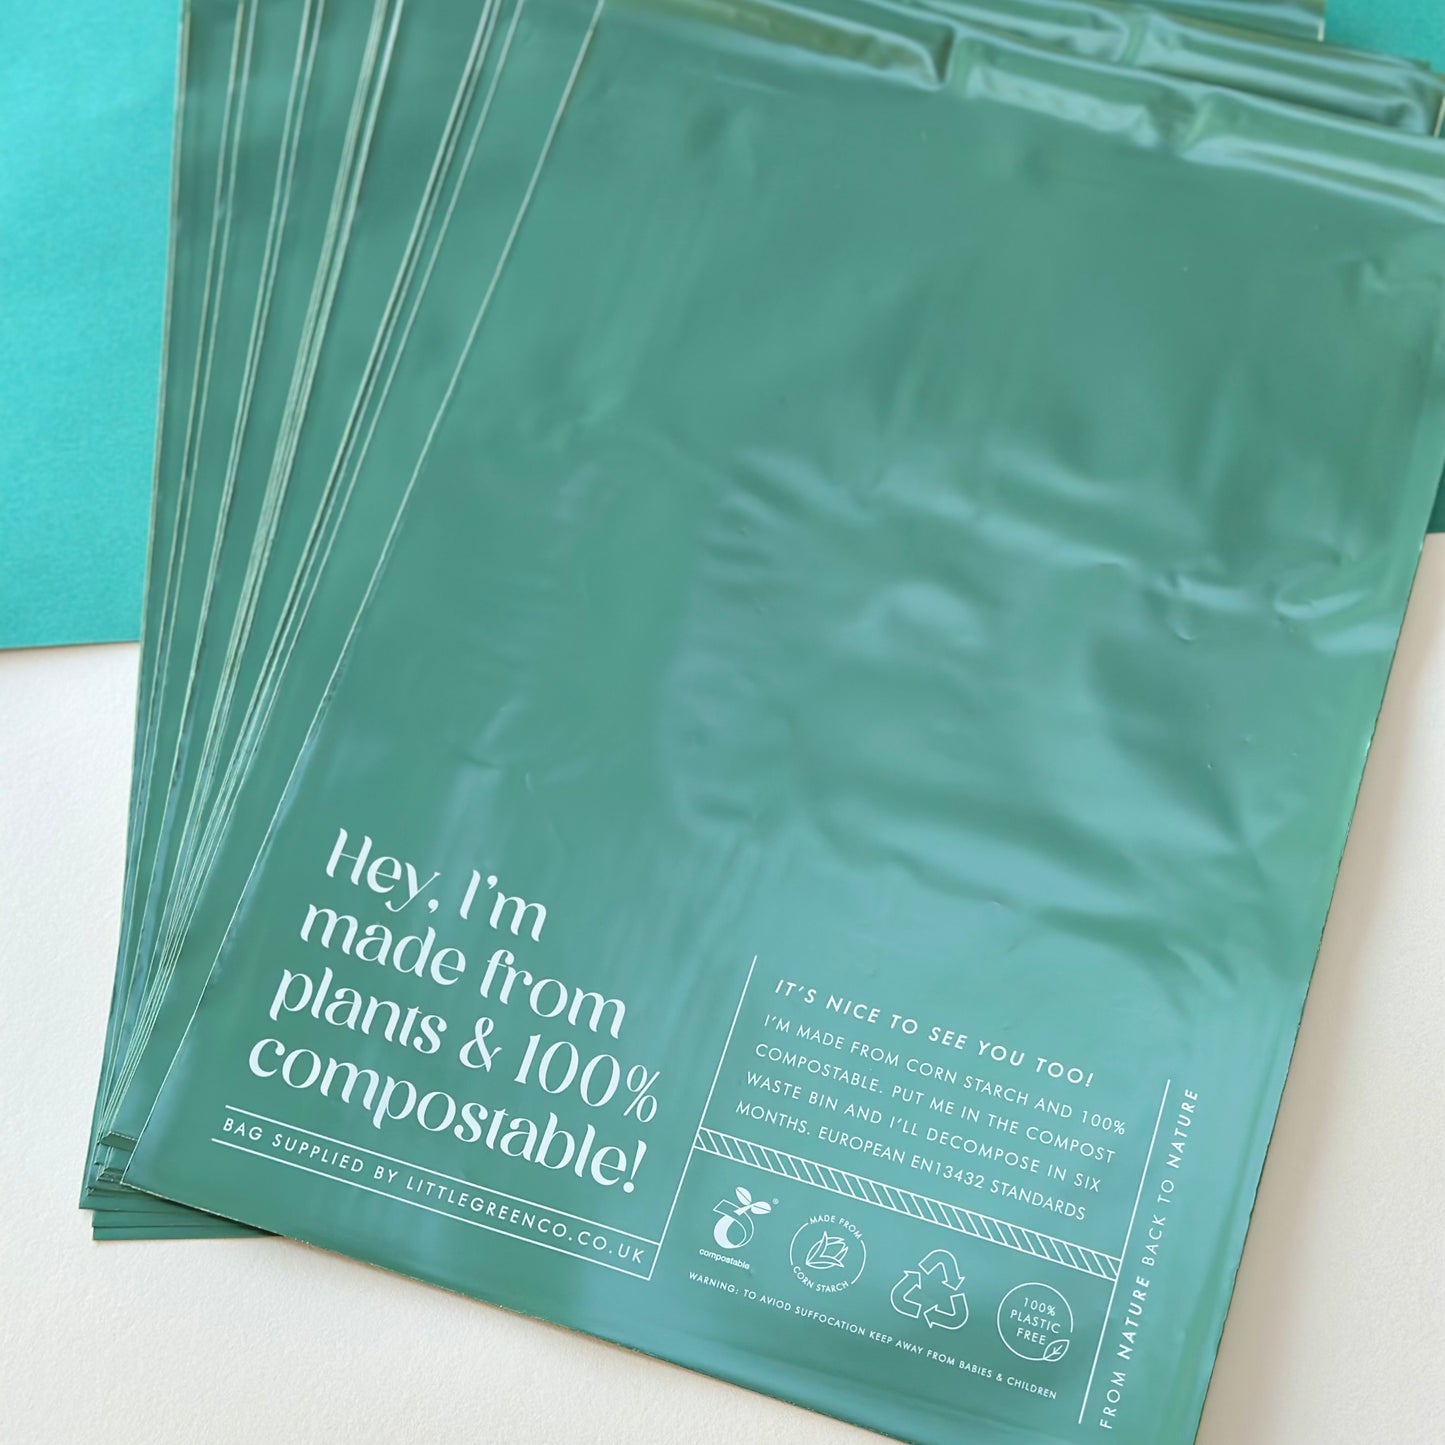 Eco-Friendly | Compostable Mailing bags - 100% cornstarch